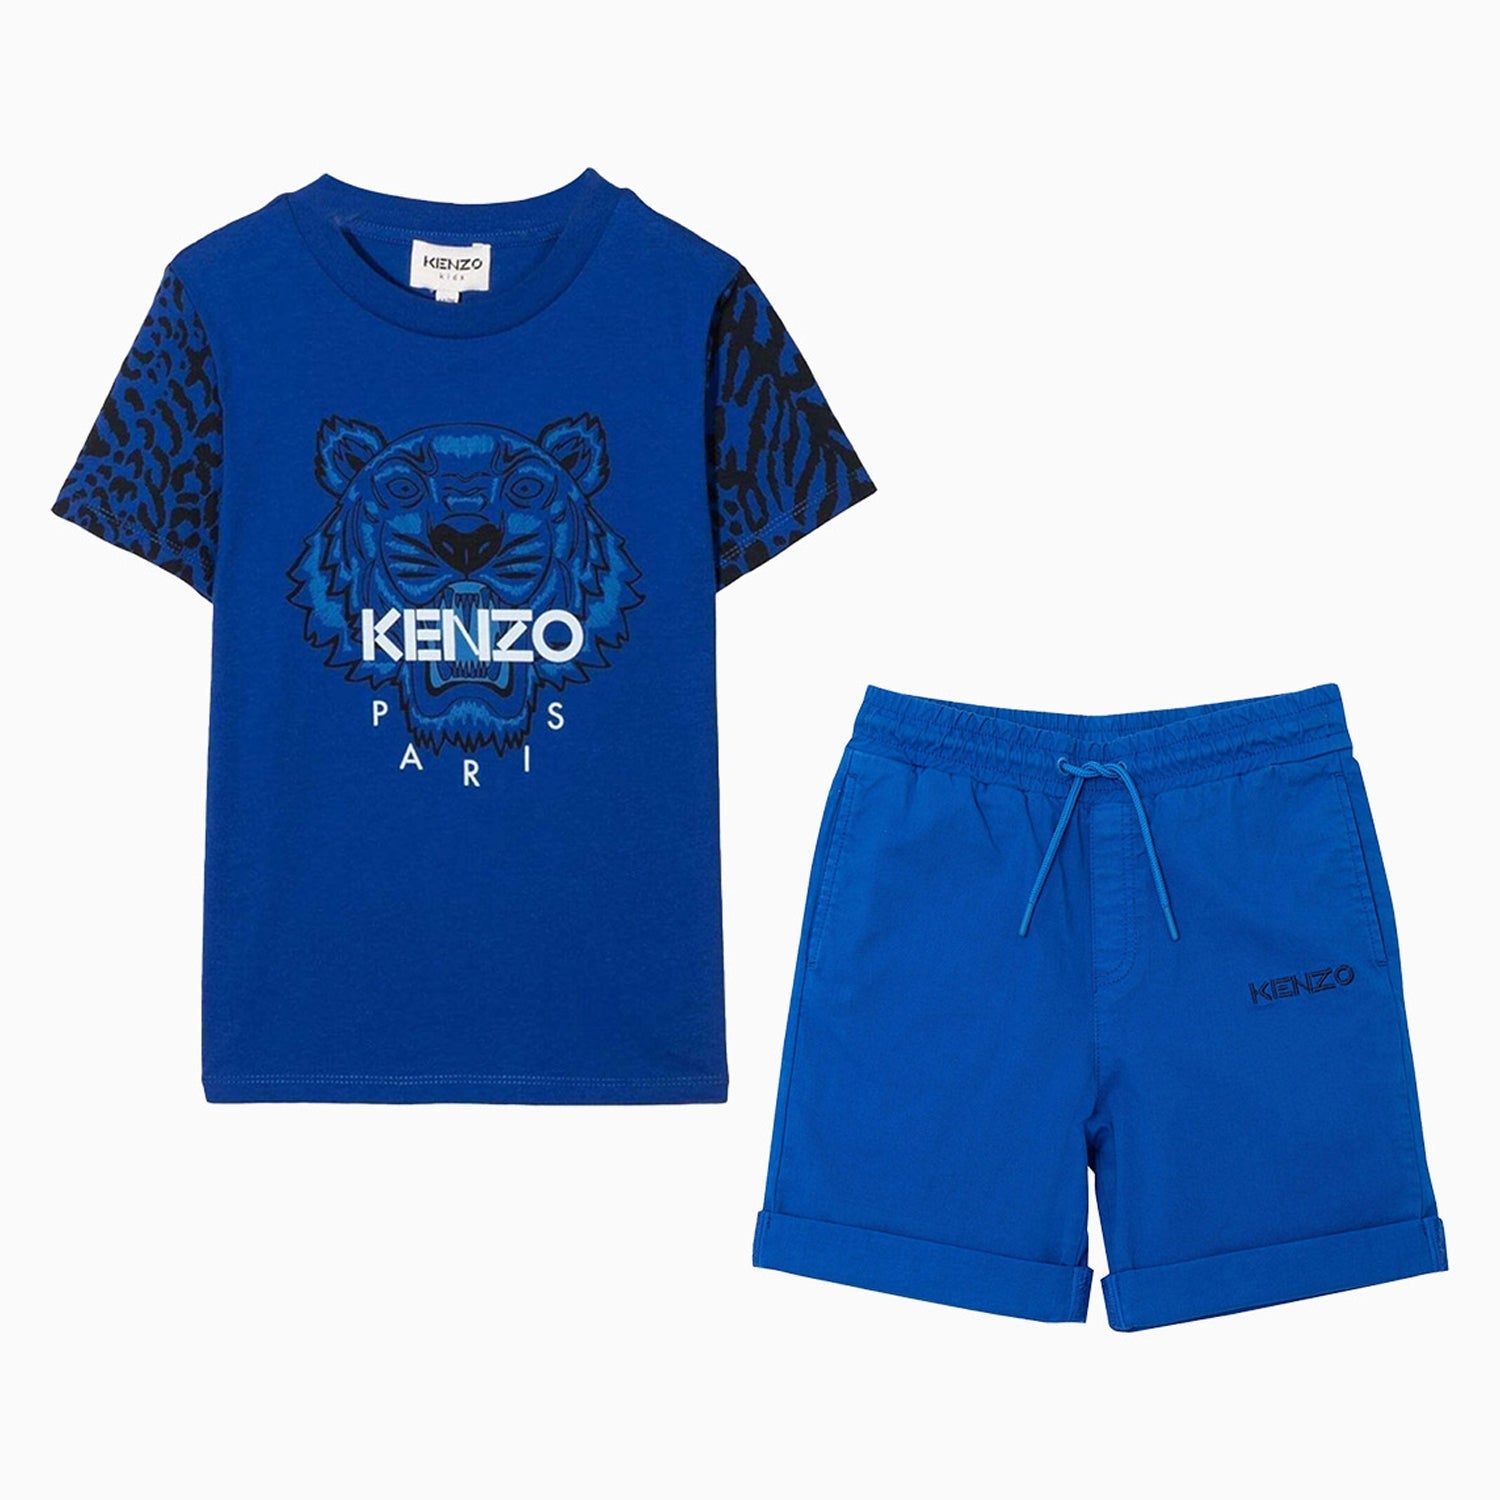 kenzo-kids-tiger-logo-t-shirt-and-short-outfit-k25636-829-k24230-829